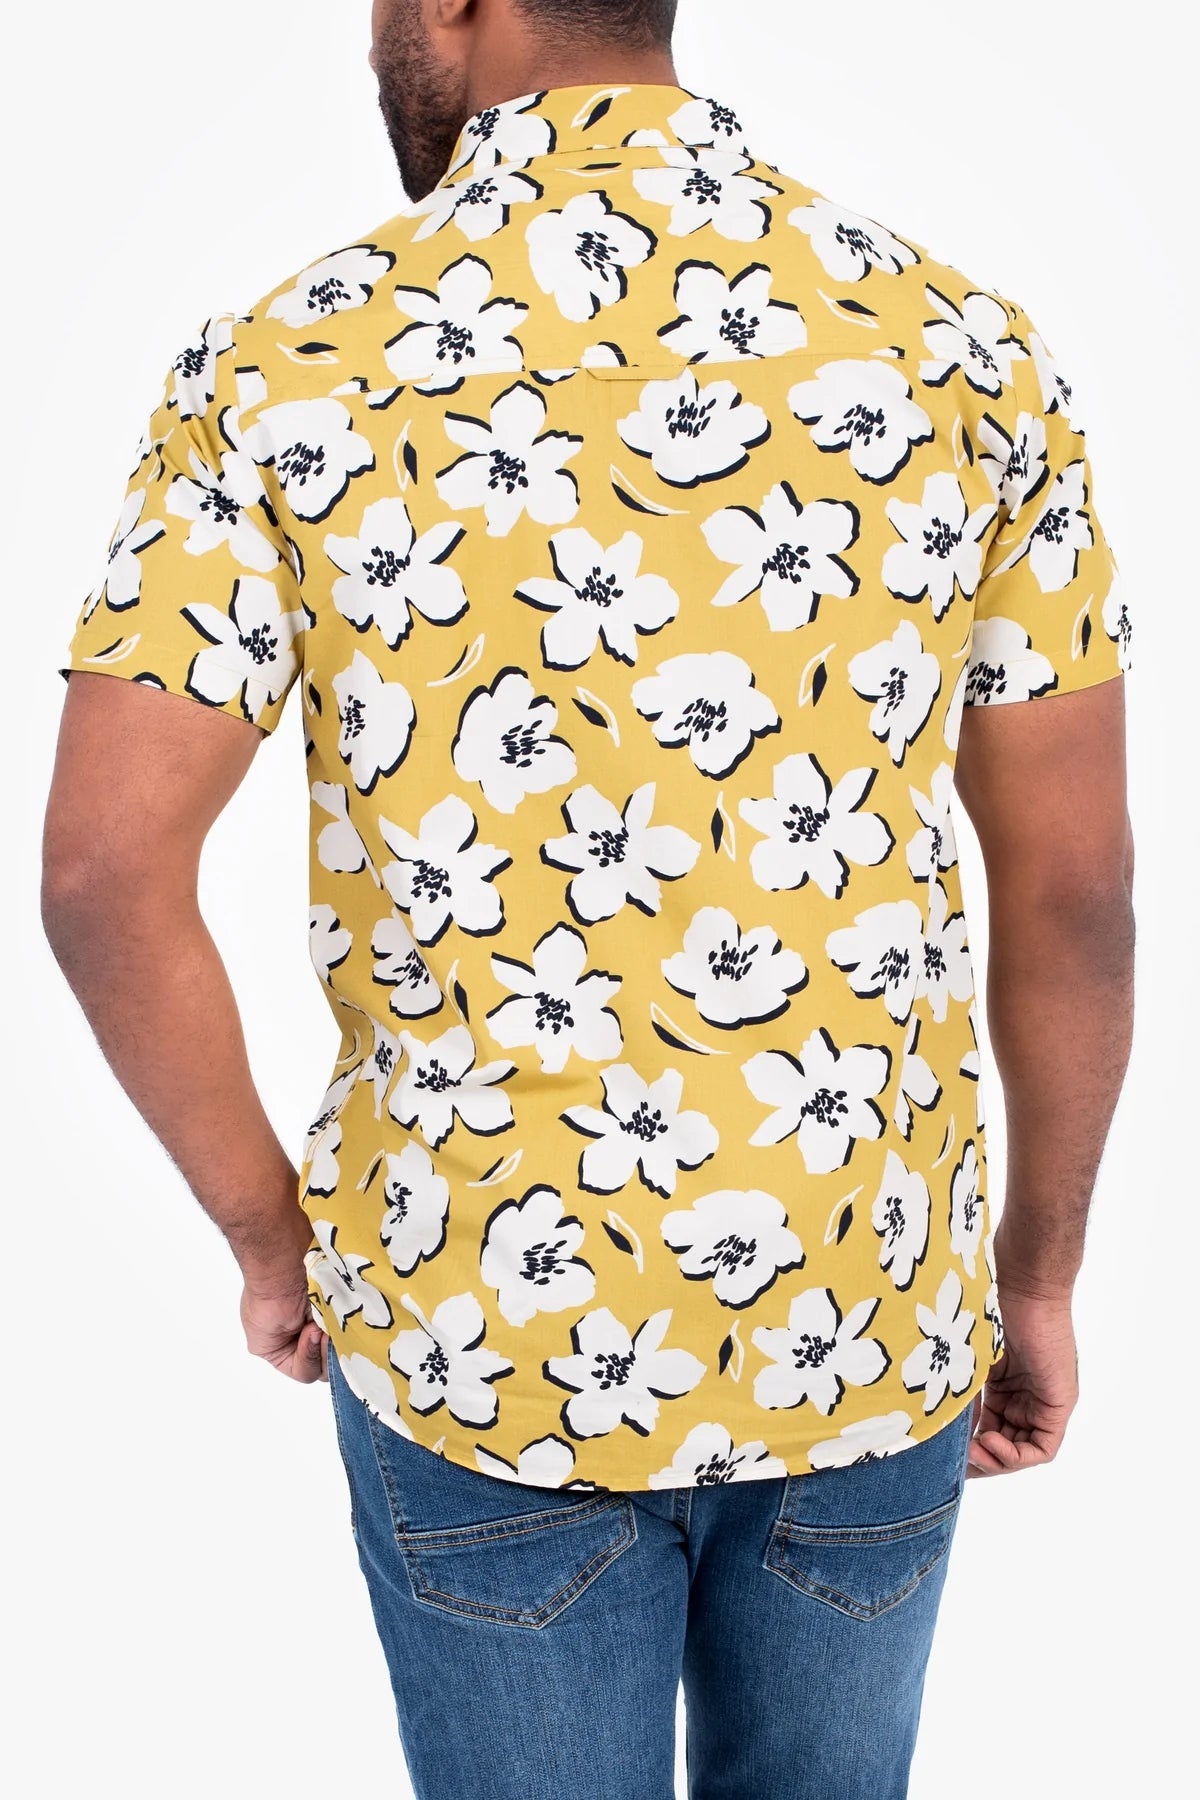 A yellow and white floral print men's shirt from brakeburn